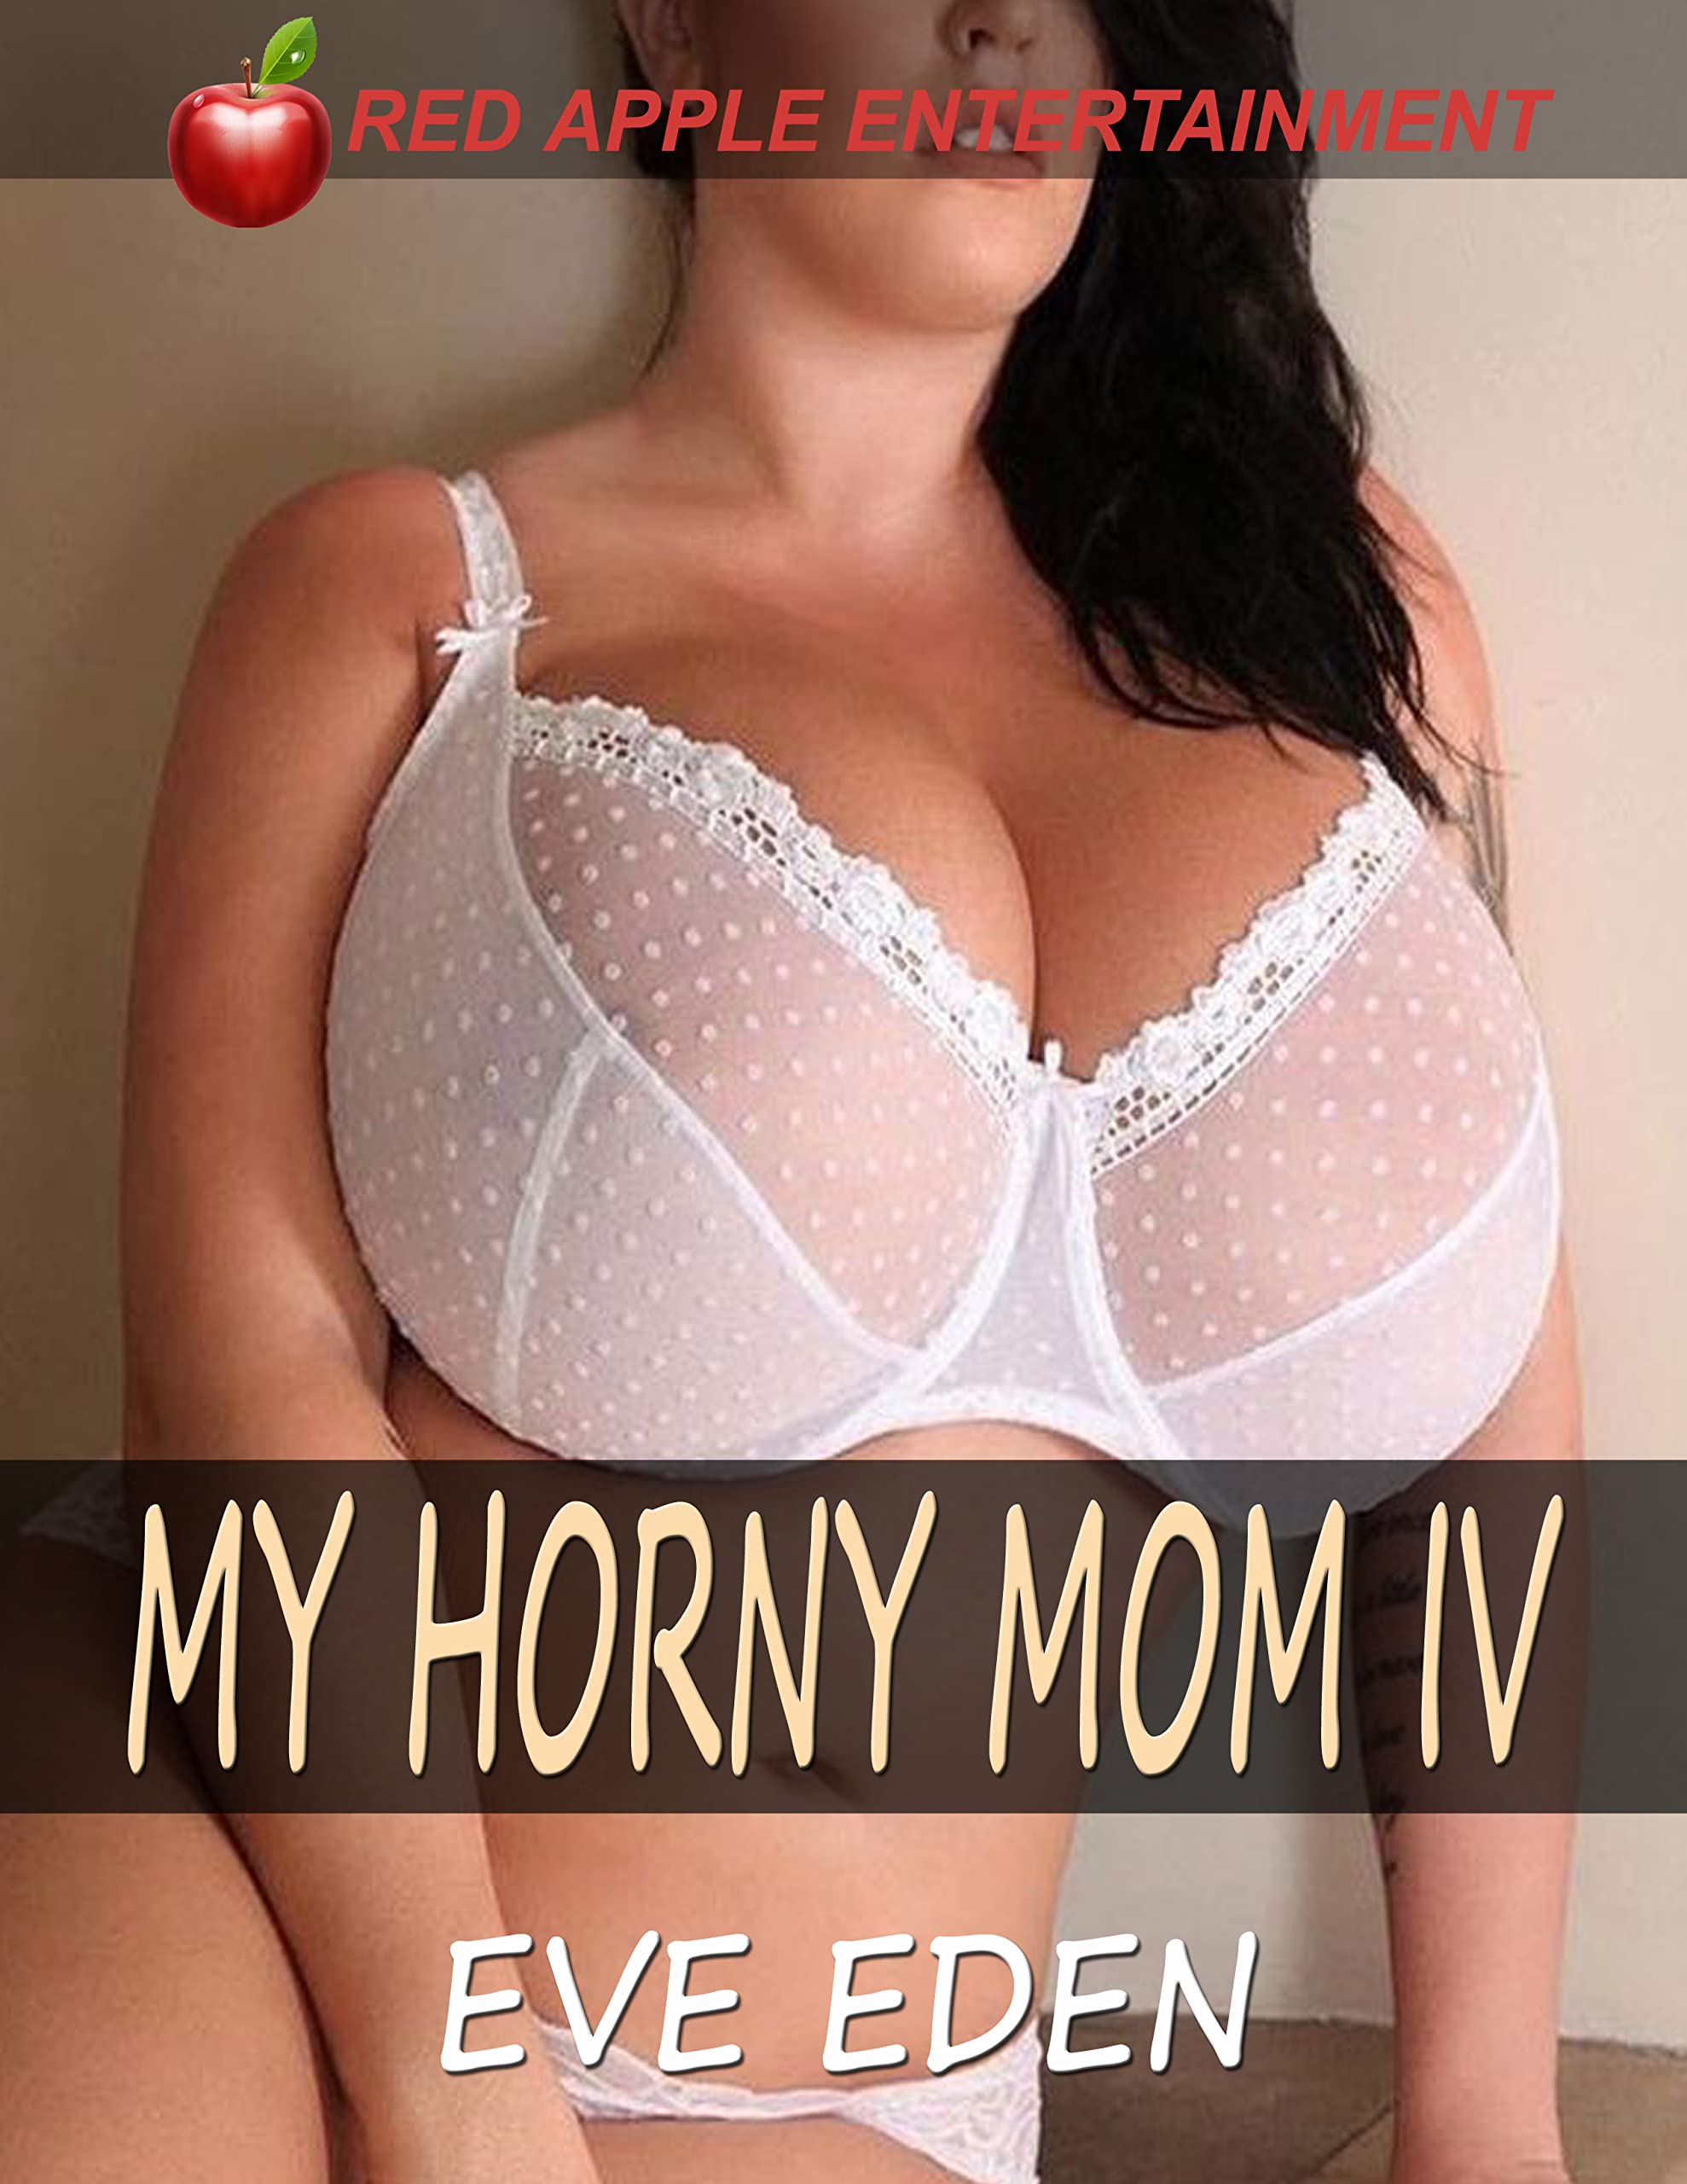 clint lupton recommends My Horny Mom